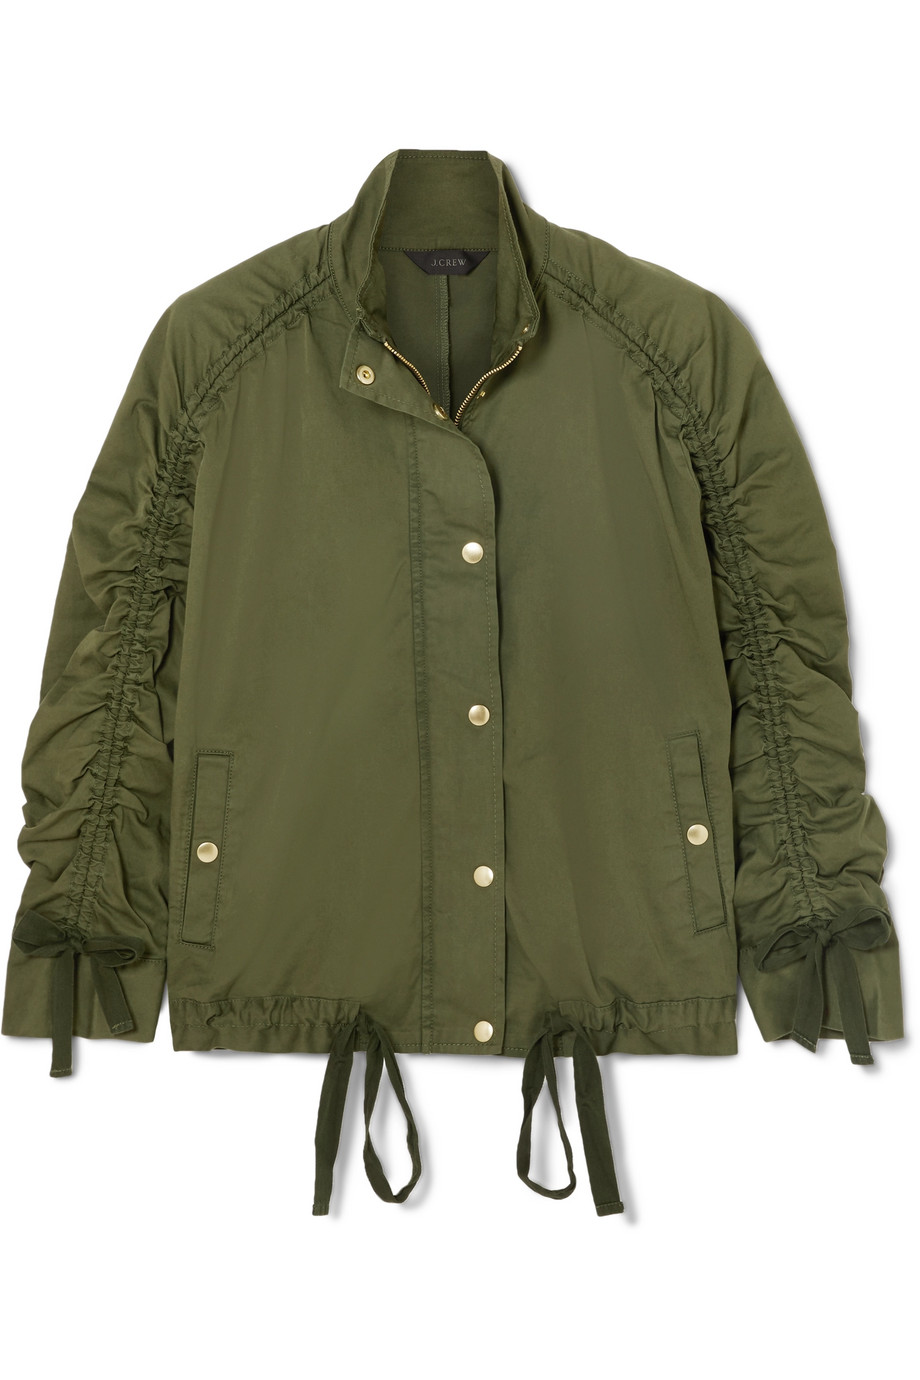 12 stylish jackets to help you combat this weird weather